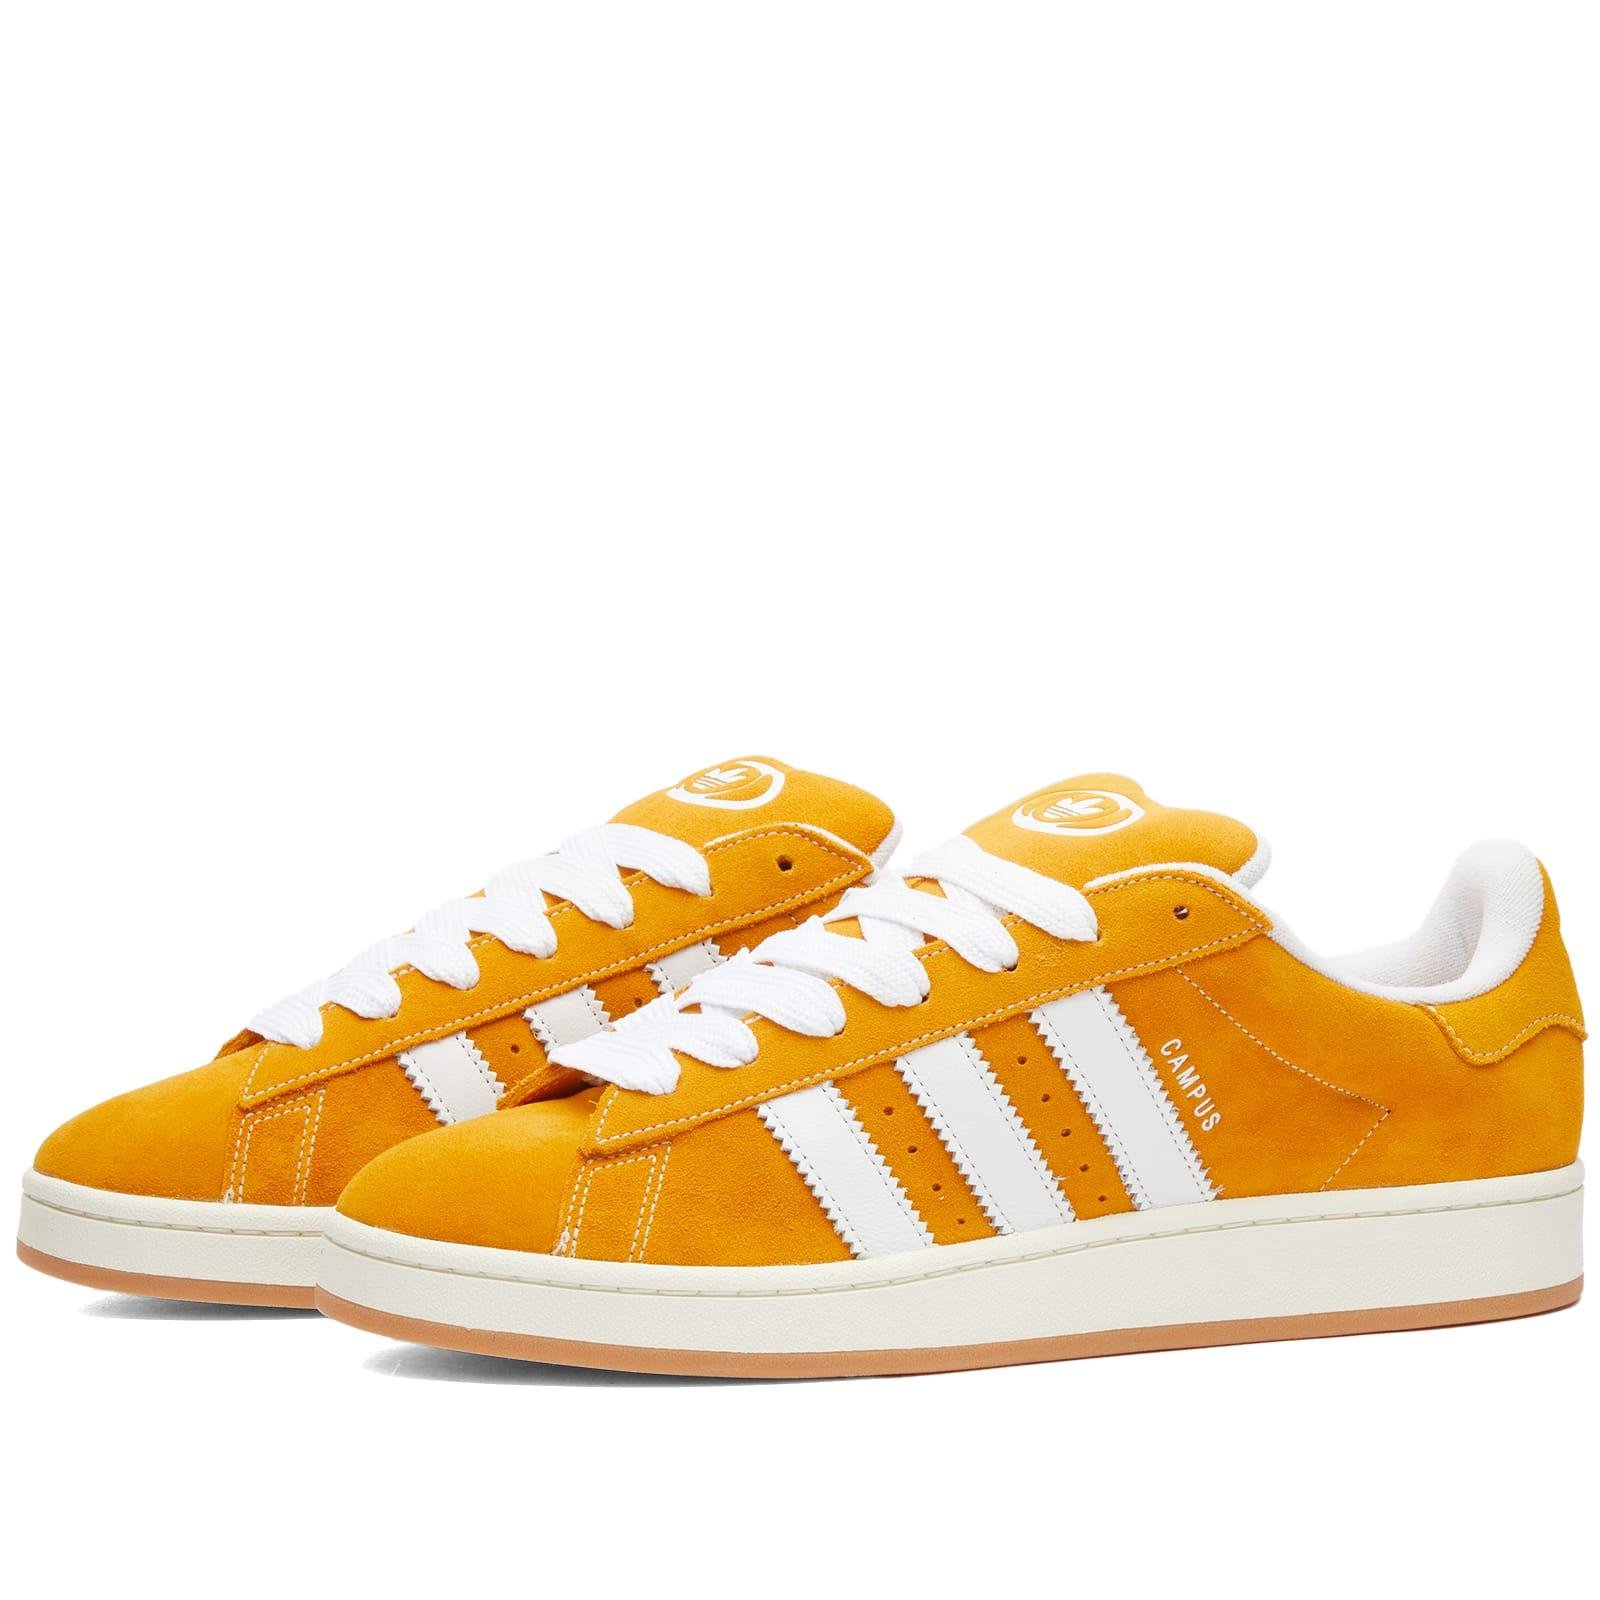 Adidas ZX 22 Boost Shoes Men's Sneakers Orange GY6699 New in Box mens sizes  | eBay